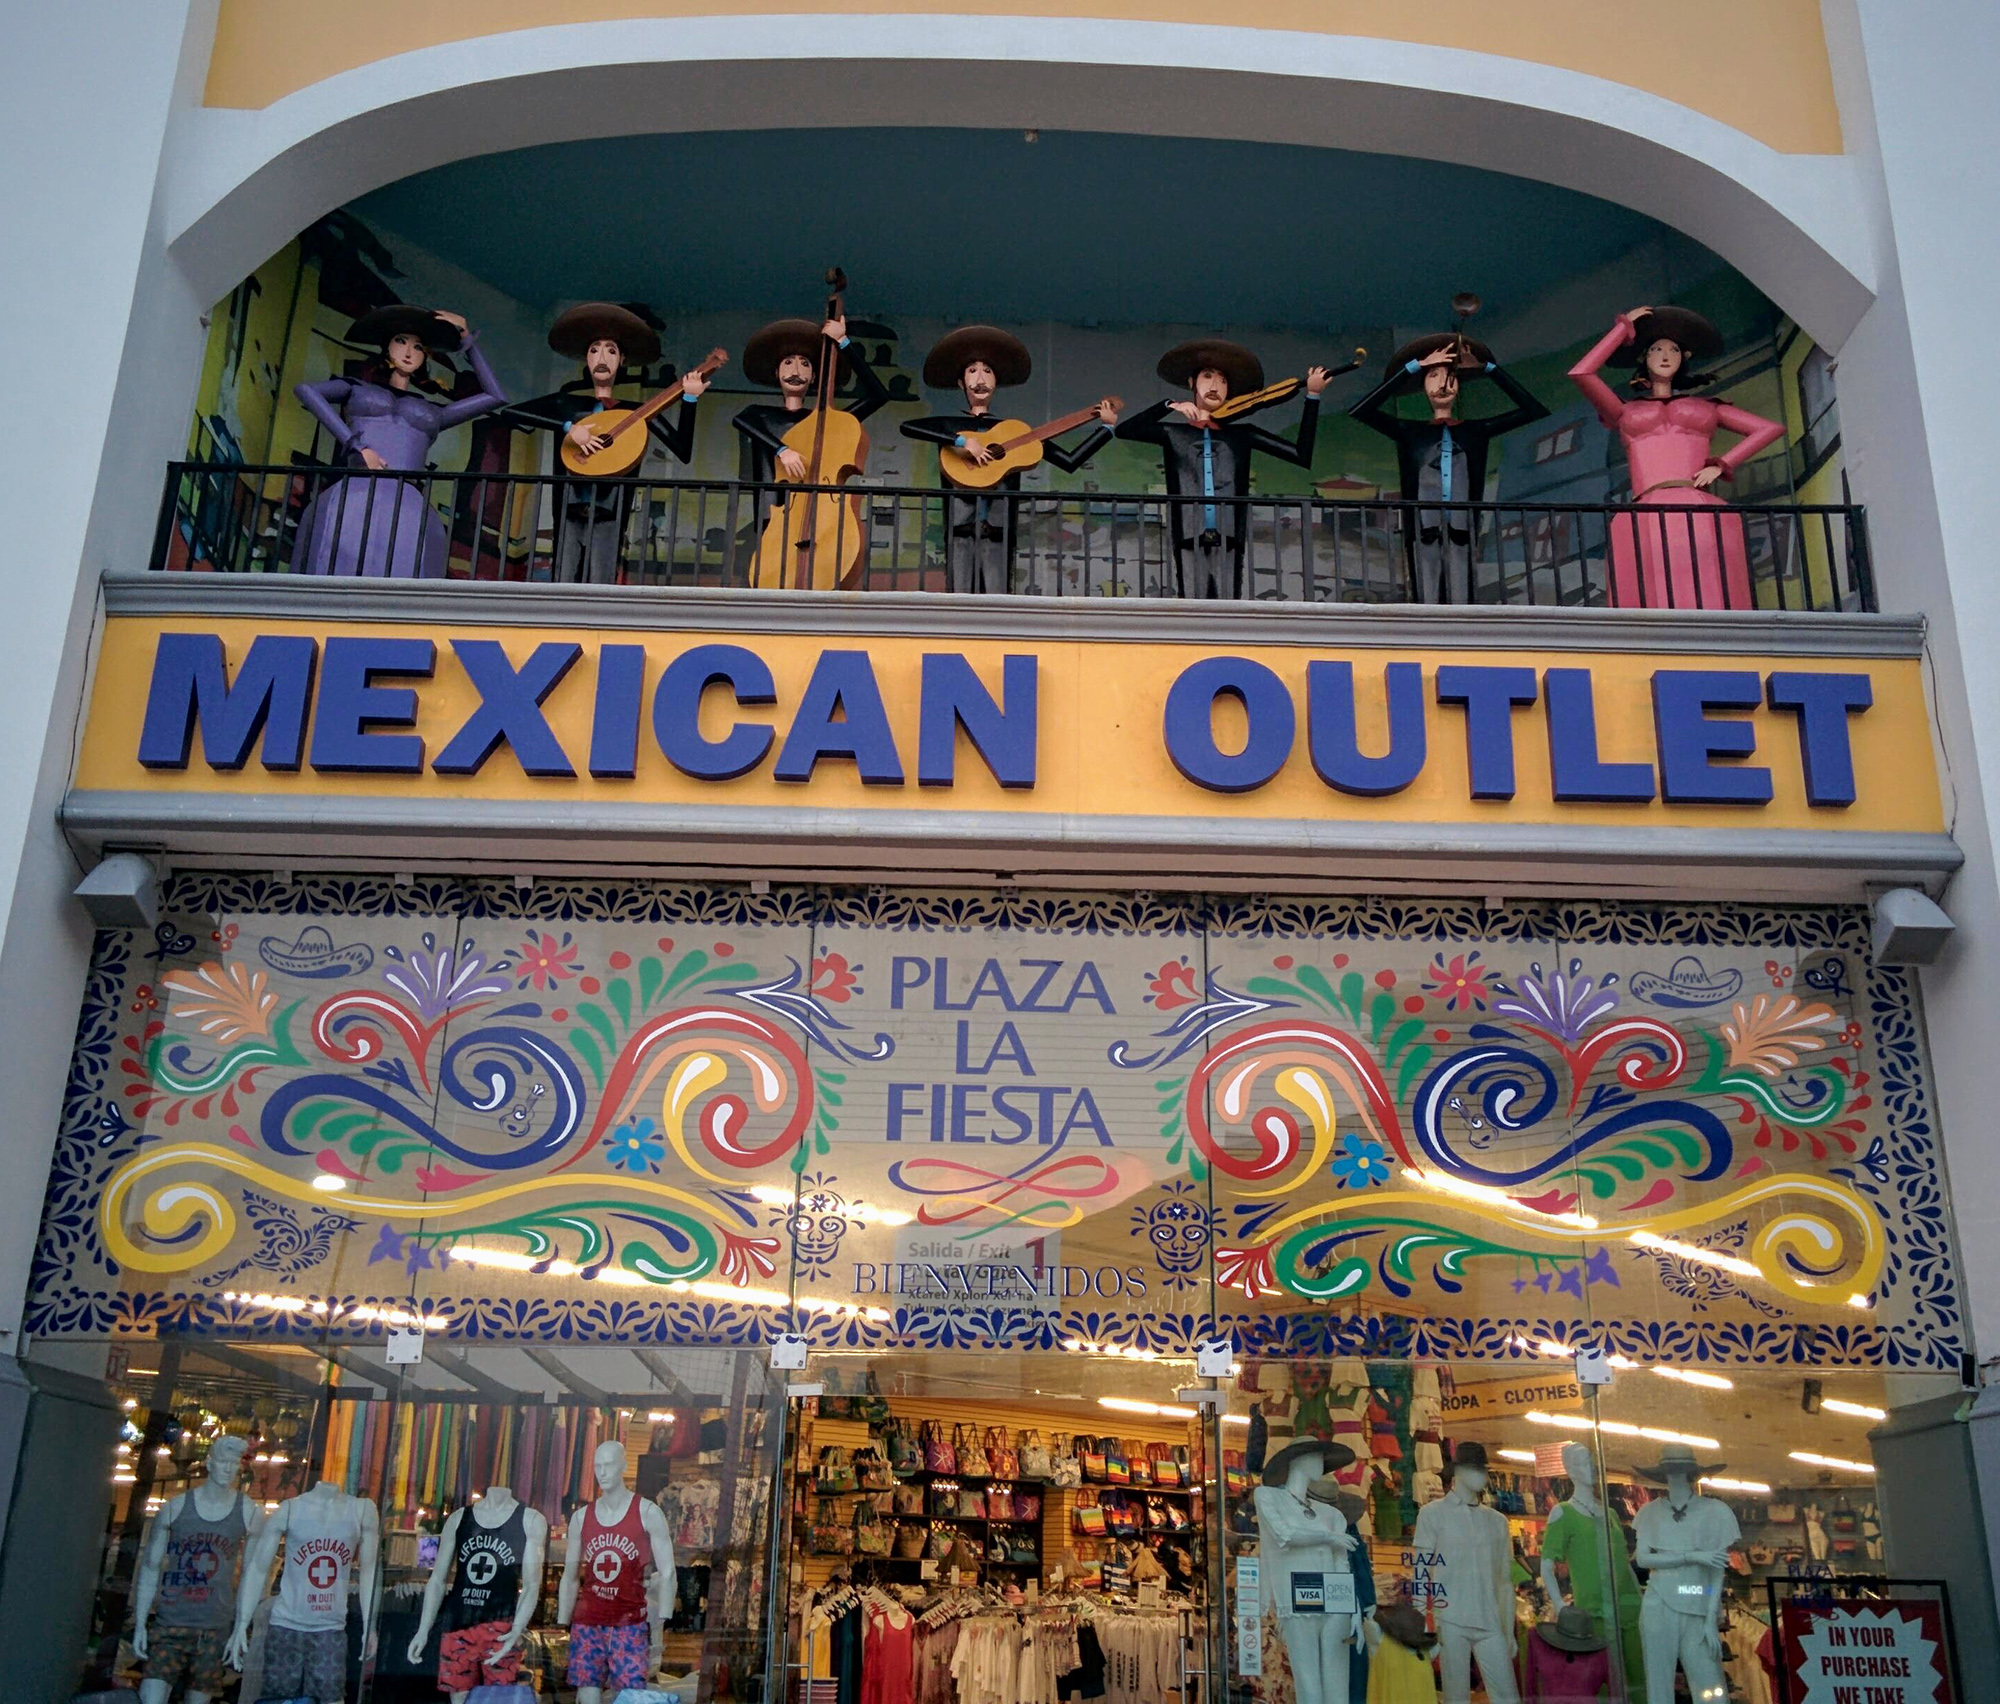 Mexican outlet